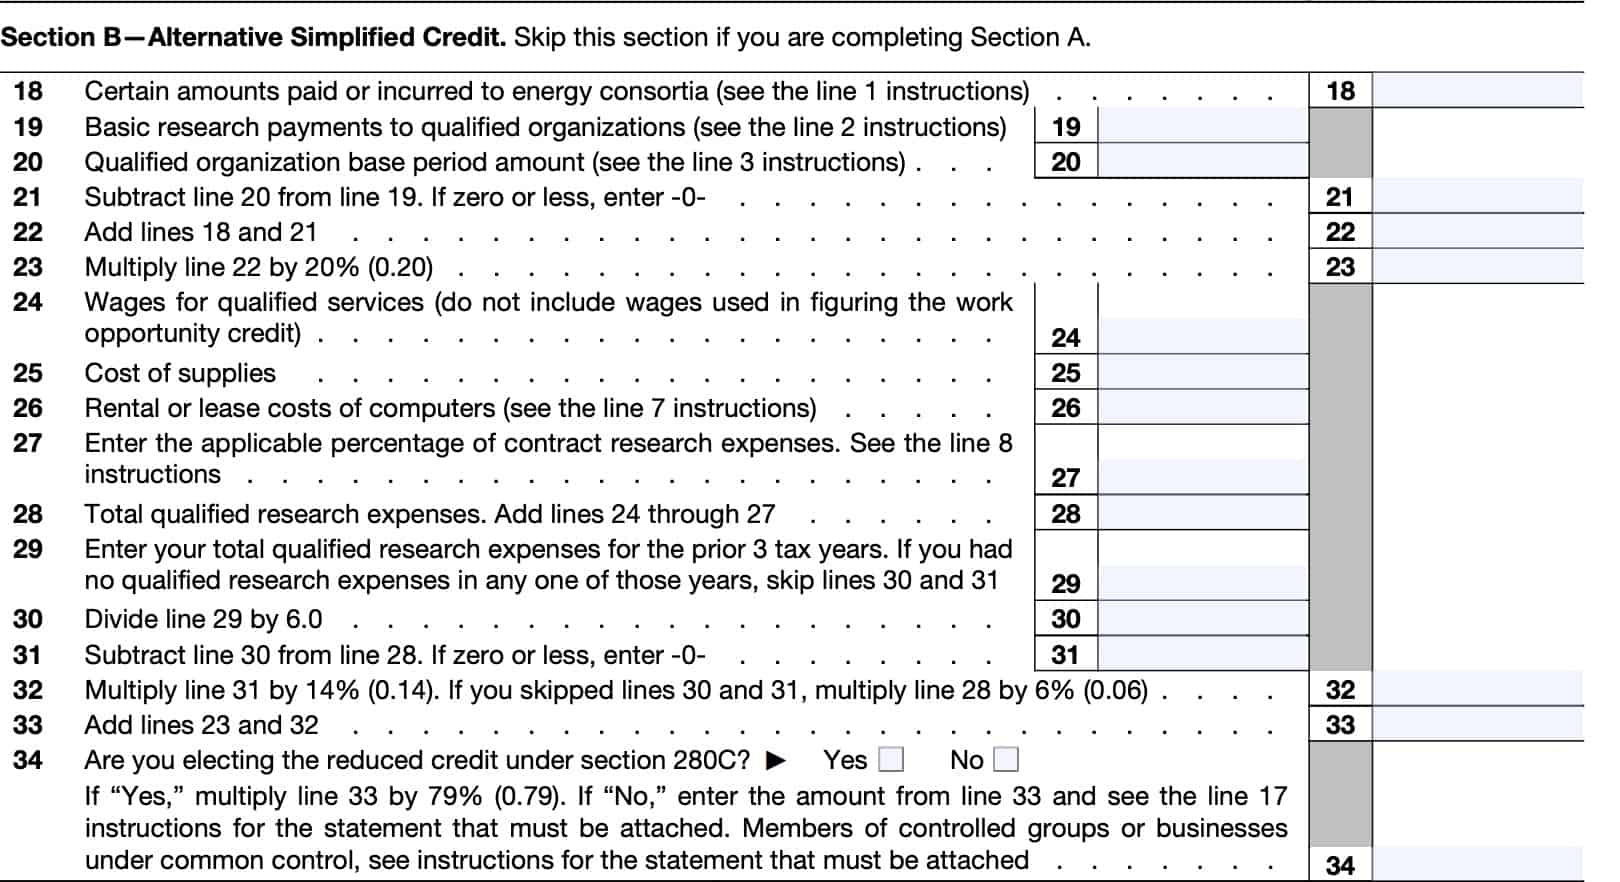 irs form 6765, section b provides alternative simplified tax credit